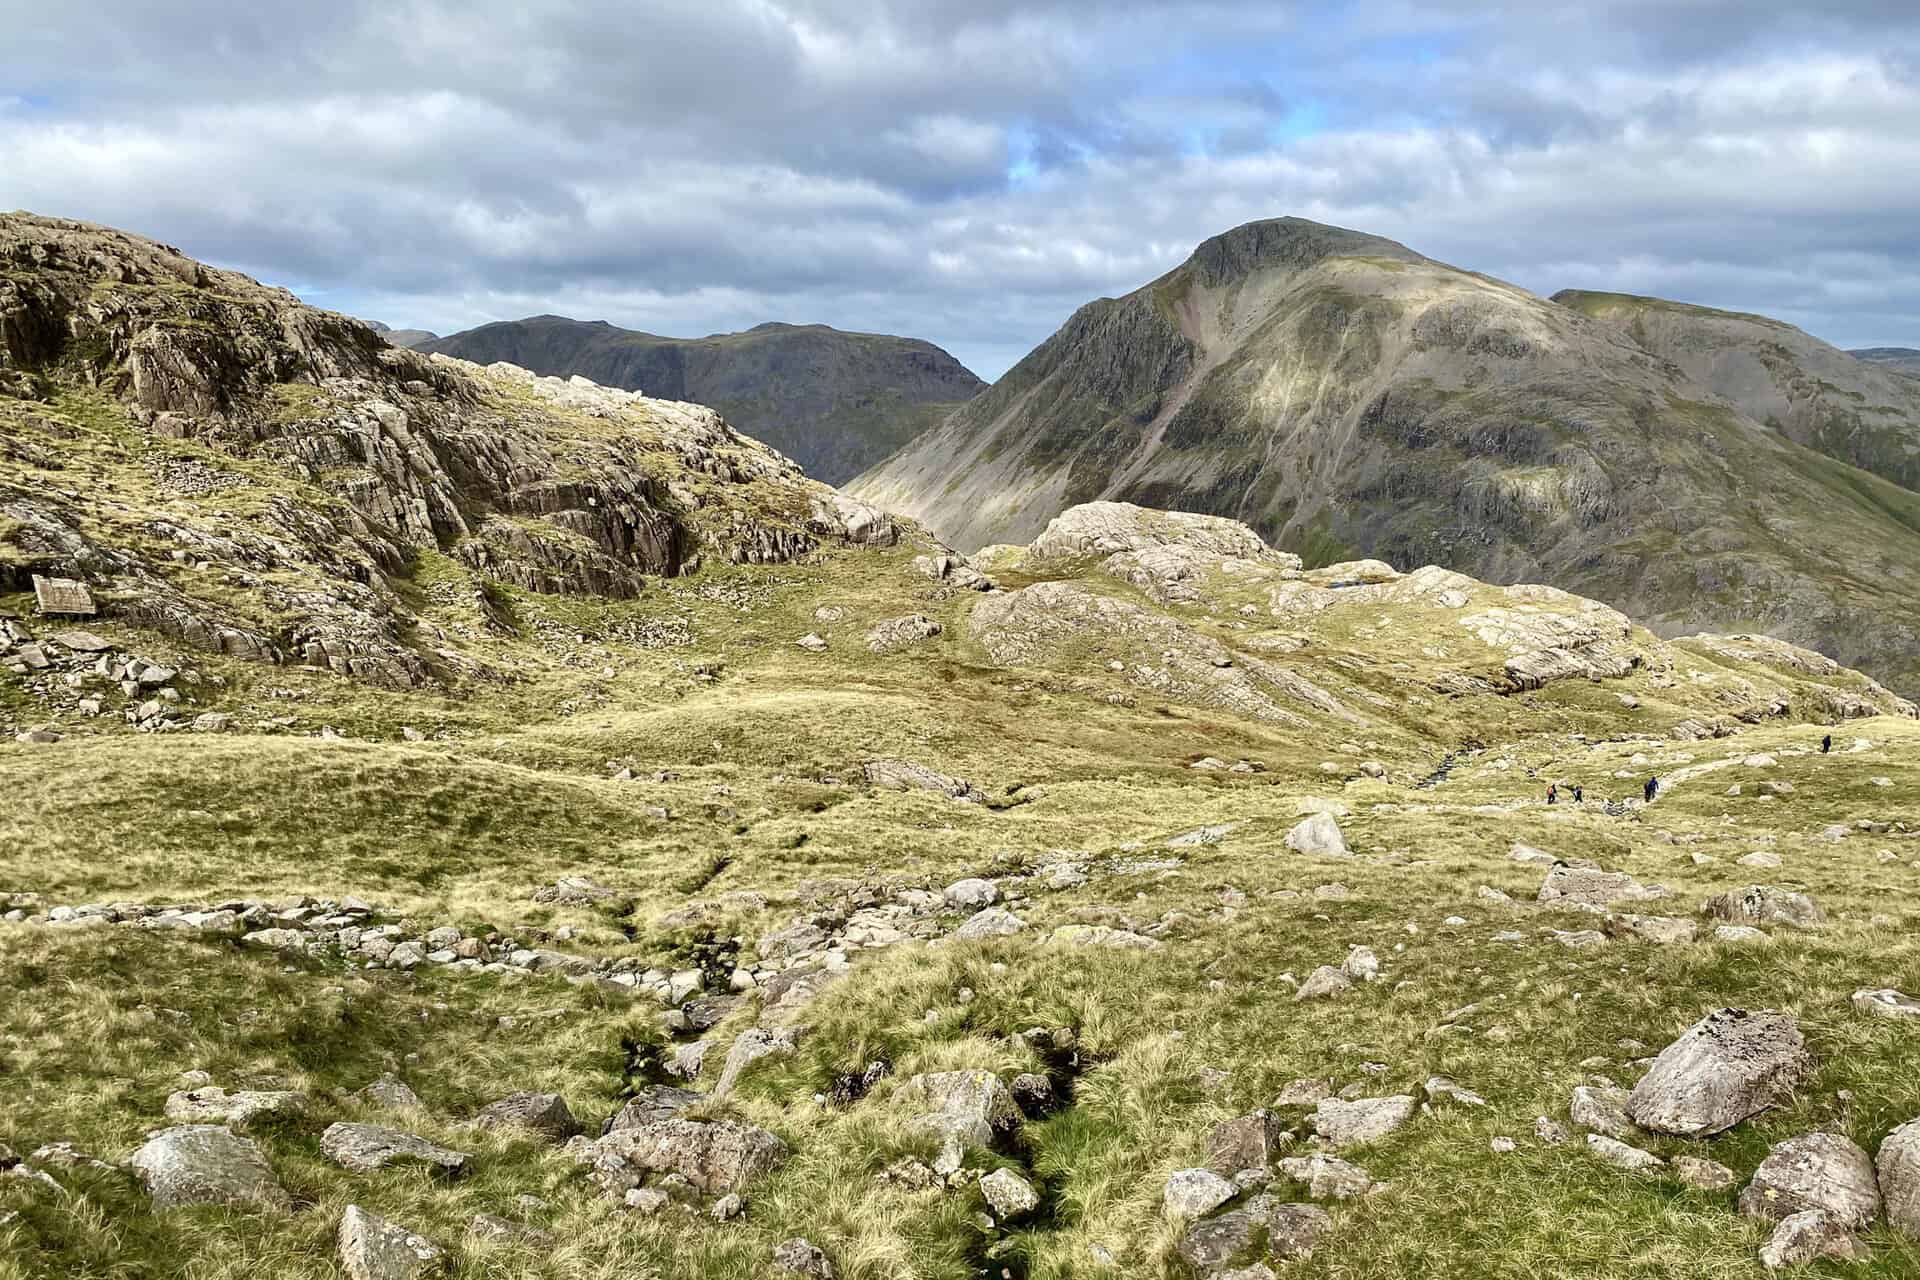 The panorama of Great Gable seen from the Scafell Pike Corridor Route. In my Western Fells map of Wainwrights.